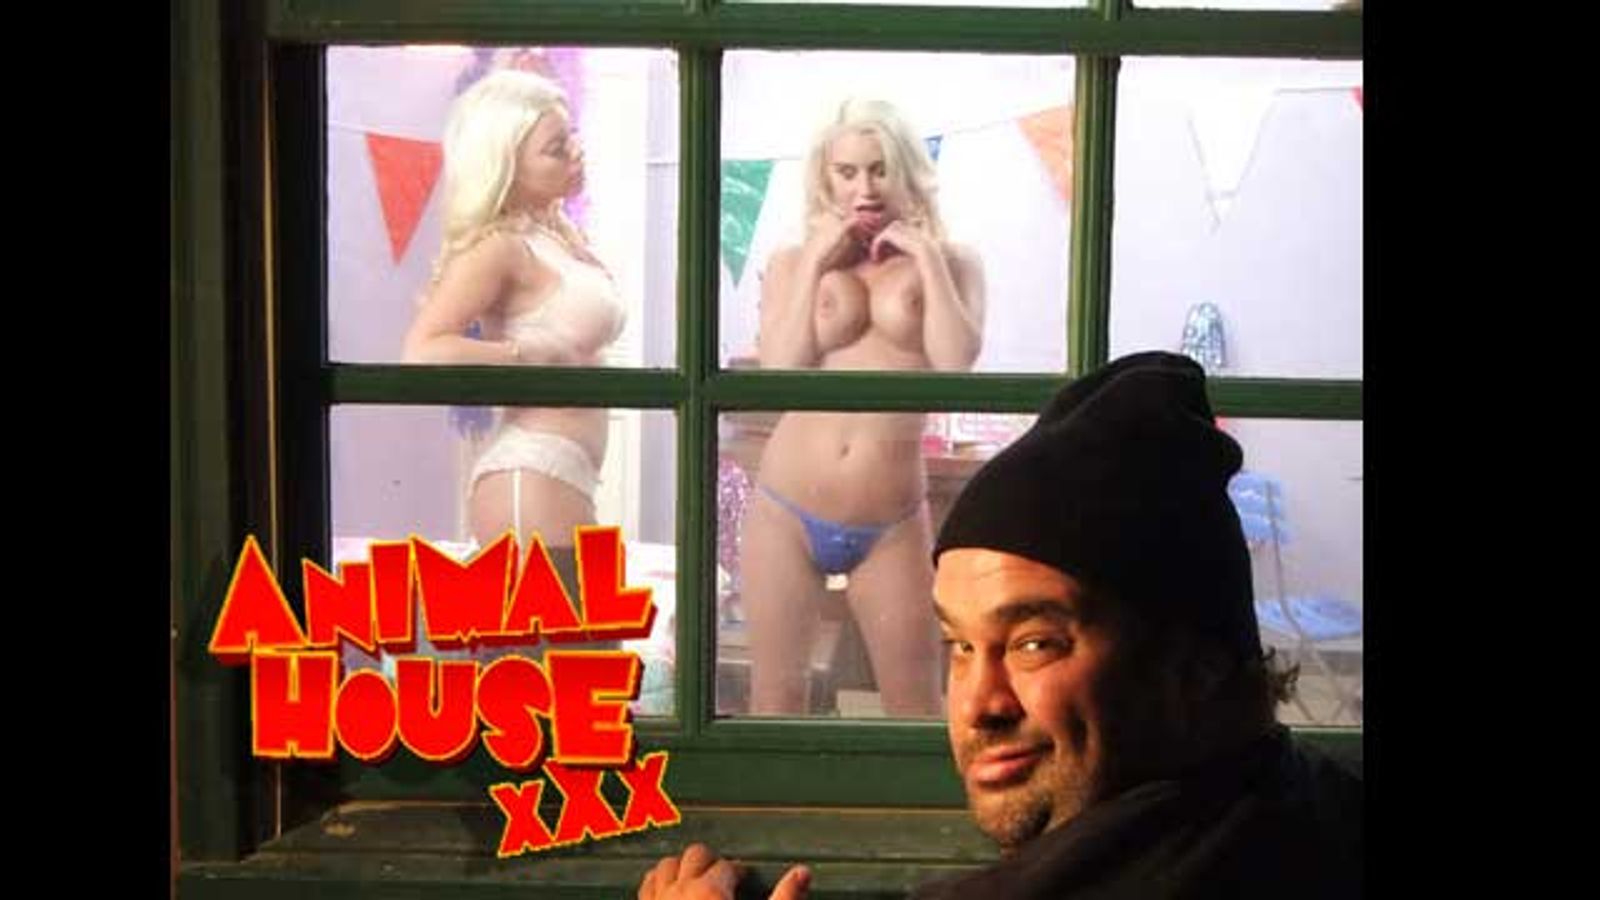 The Girls of 'Not Animal House XXX' Debut on YouTube